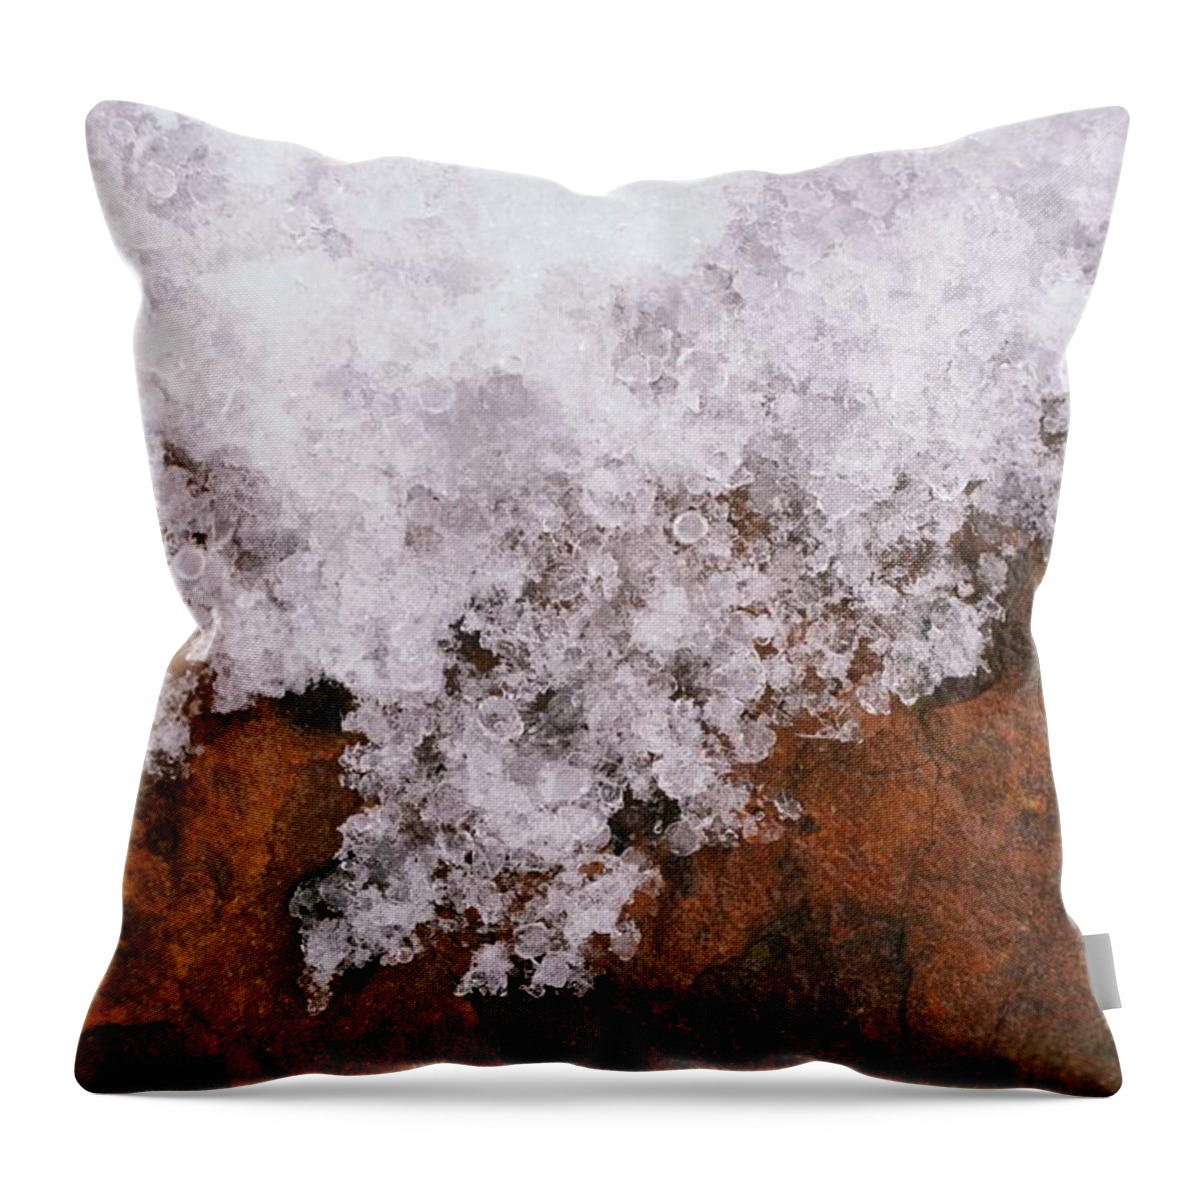 Rock Throw Pillow featuring the photograph The Edge of Ice Up Close by Gaby Ethington